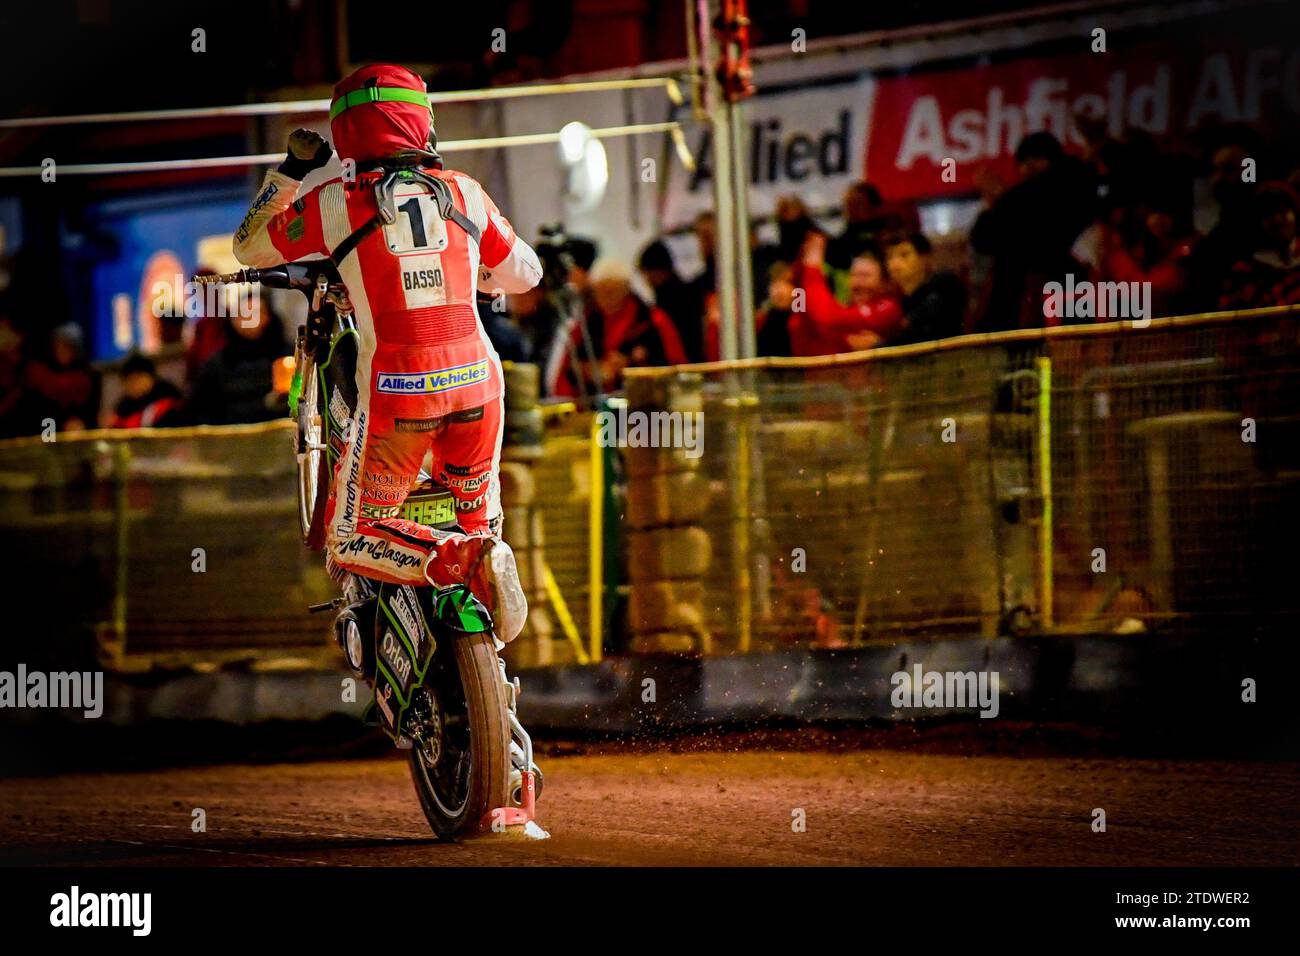 Glasgow Tigers Danish Speedway Rider Ben Basso Celebrating A Race Win With A Wheelie In Front Of Fans At The Glasgow Speedway Track Stock Photo